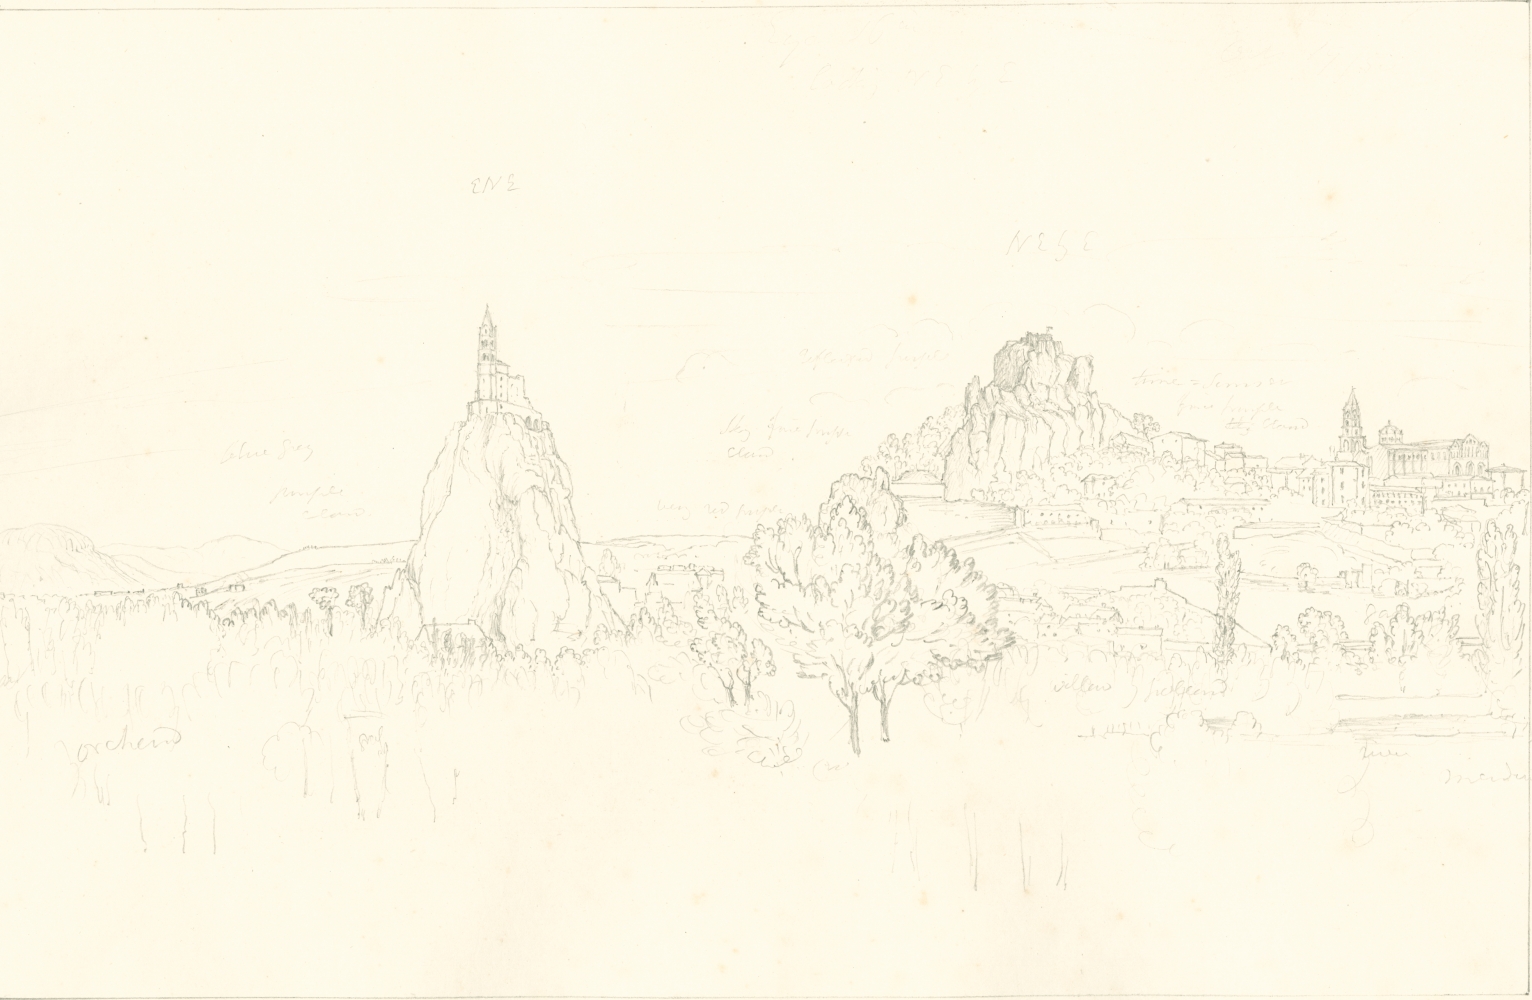 Sir John Frederick William HERSCHEL (English, 1792-1872) "No 495 Le Puy. From across the bridge. The Church of St Michel, The Rocher du Corneille & the Cathedral”, 19 October 1850 Camera lucida drawing, pencil on paper 21.6 x 33.3 cm on 25.2 x 38.5 cm paper Numbered, signed, dated and titled “No 495 / JFW Herschel del. Cam. Luc. Oct. 19, 1850 / Le Puy. From across the bridge. The Church of St Michel bearing ENE, The Rocher du Corneille NE by E. / (by compass) & the Cathedral” in ink in border